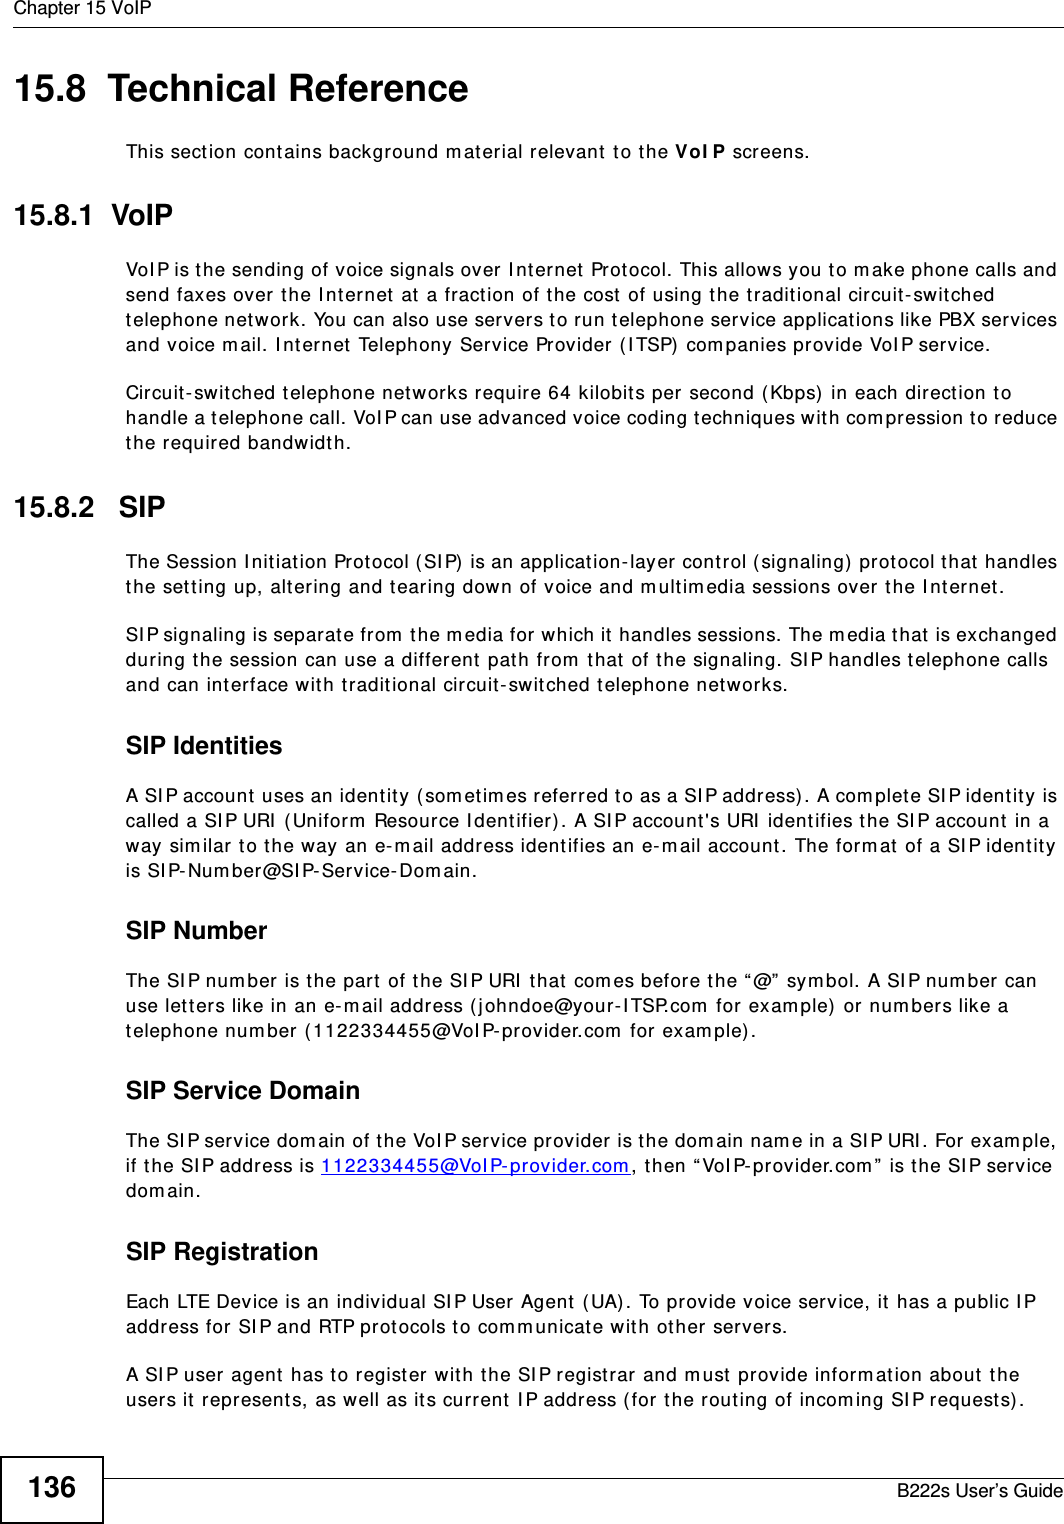 Chapter 15 VoIPB222s User’s Guide13615.8  Technical ReferenceThis sect ion cont ains background m aterial relevant  t o the VoI P screens.15.8.1  VoIP VoI P is t he sending of voice signals over I nt ernet  Protocol. This allows you t o m ake phone calls and send faxes over the I nt ernet  at  a fraction of the cost  of using t he t radit ional circuit- switched telephone network. You can also use servers to run t elephone service applicat ions like PBX services and voice m ail. I nt ernet  Telephony Service Provider ( I TSP)  com panies provide VoI P service. Circuit- swit ched t elephone net works require 64 kilobit s per second (Kbps)  in each direct ion to handle a t elephone call. VoI P can use advanced voice coding t echniques wit h com pression to reduce the required bandwidt h. 15.8.2   SIPThe Session I nit iation Prot ocol ( SI P)  is an application- layer control ( signaling)  prot ocol t hat  handles the set ting up, altering and t ear ing down of voice and m ultim edia sessions over t he I nt ernet .SI P signaling is separat e from  t he m edia for which it  handles sessions. The m edia t hat  is exchanged during t he session can use a different  path from  t hat of the signaling. SI P handles t elephone calls and can interface wit h t radit ional circuit- switched t elephone net works.SIP IdentitiesA SI P account  uses an ident it y (som et im es referred to as a SI P address). A com plet e SI P ident it y  is called a SI P URI  ( Uniform  Resour ce I dent ifier) . A SI P account &apos;s URI  ident ifies t he SI P account  in a way sim ilar t o t he way an e-m ail addr ess identifies an e-m ail account . The form at  of a SI P identit y is SI P- Num ber@SI P-Service-Dom ain.SIP NumberThe SI P num ber is t he part  of t he SI P URI  t hat  com es before t he “ @”  sym bol. A SI P num ber can use let ters like in an e-m ail address ( j ohndoe@your-I TSP.com  for exam ple) or num bers like a telephone num ber (1122334455@VoI P- provider.com  for exam ple) .SIP Service DomainThe SI P ser vice dom ain of t he VoI P service provider is t he dom ain nam e in a SI P URI . For exam ple, if the SI P address is 1 12 23 34 45 5@VoI P- pr ov ider.com , then “ VoI P- provider.com ” is t he SI P ser vice dom ain.SIP RegistrationEach LTE Device is an individual SI P User Agent  ( UA). To provide voice ser vice, it has a public I P address for SI P and RTP prot ocols to com m unicat e wit h ot her ser vers. A SI P user agent  has t o register wit h t he SI P registrar and m ust  provide inform at ion about  t he users it represent s, as well as it s current  I P address (for the rout ing of incom ing SI P request s) . 